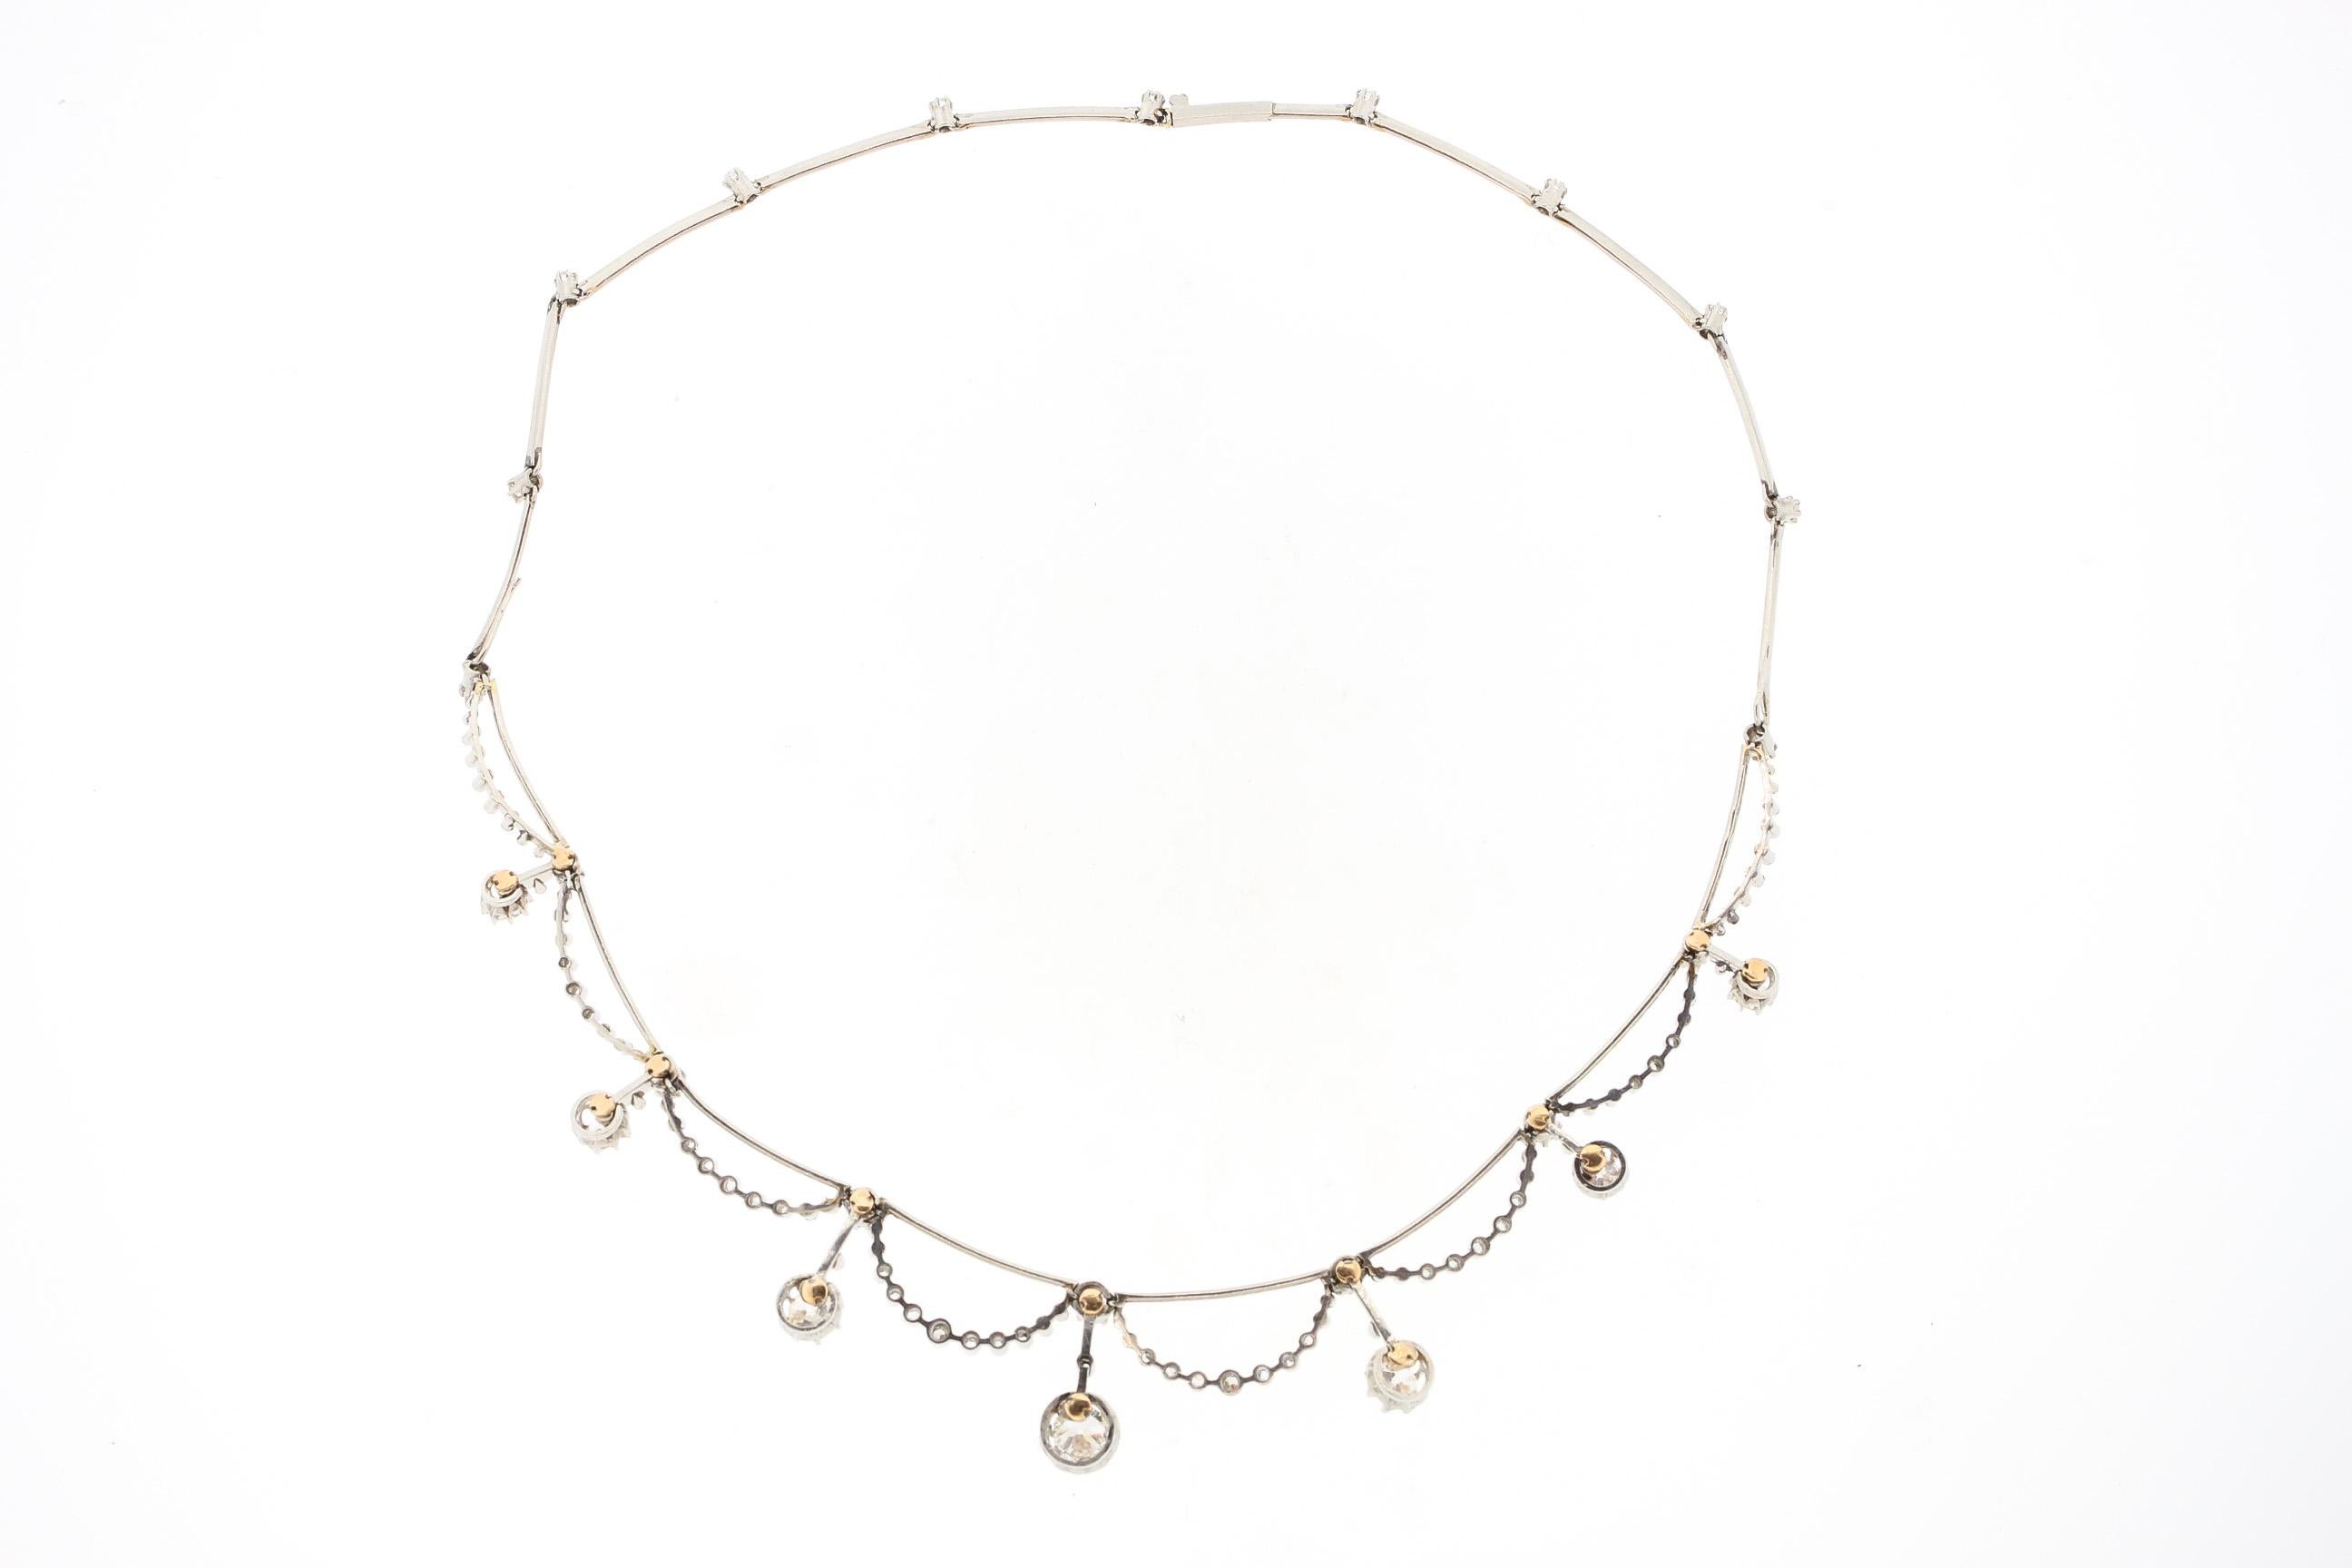 A very pretty antique Belle Époque diamond swag necklace dating to about 1910. This necklace has jack knife platinum sections that suspend half moons secretions of diamonds and diamond pendant fringe. The necklace circles the entire neck and lays so